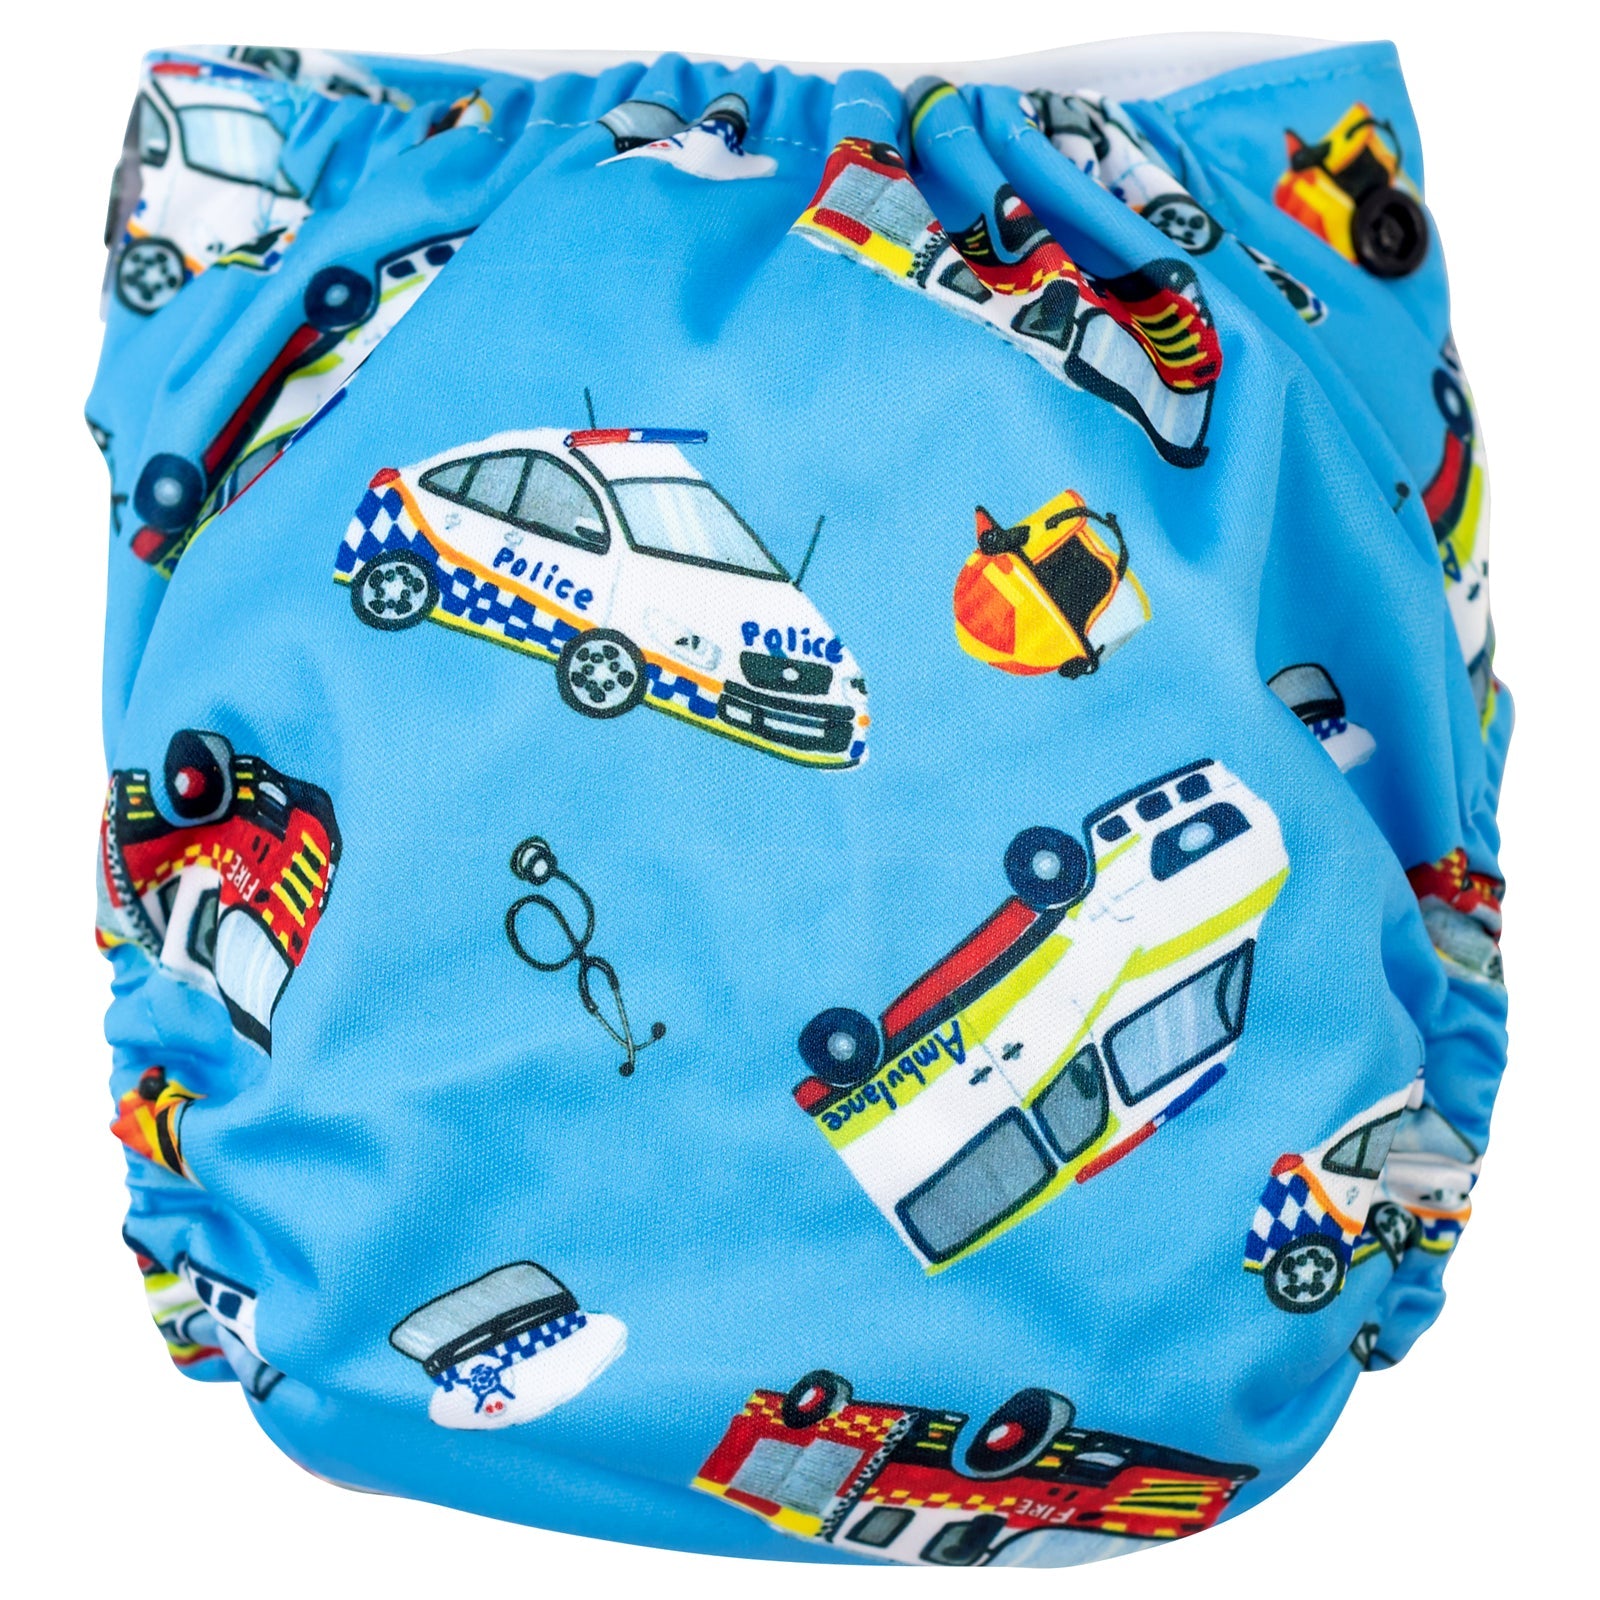 First Responders Reusable Cloth Nappy